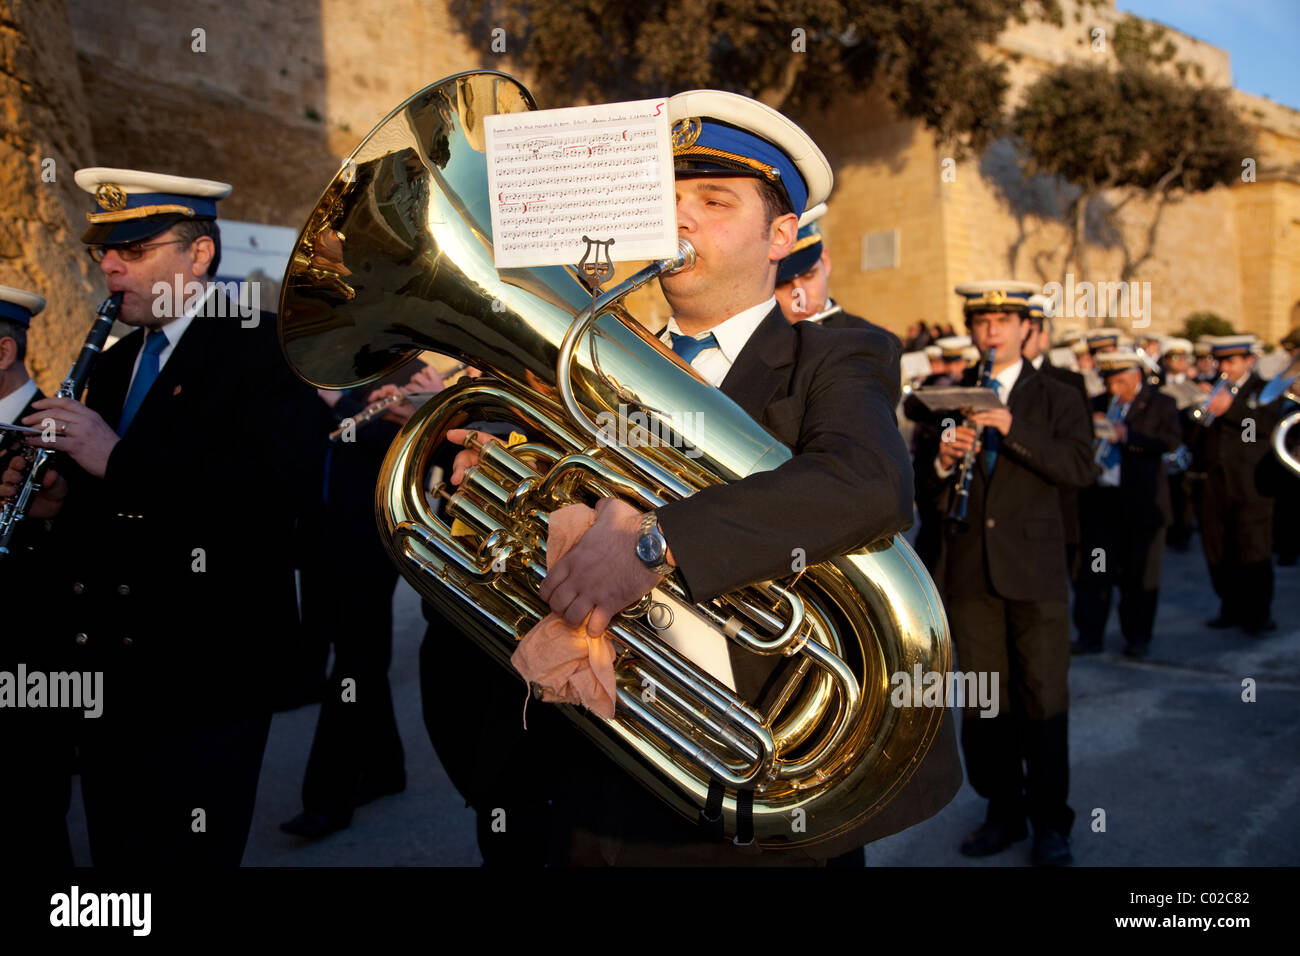 Members of a brass band in dark clothes play music during street parades commemorating Good Friday that are held in Malta. Stock Photo